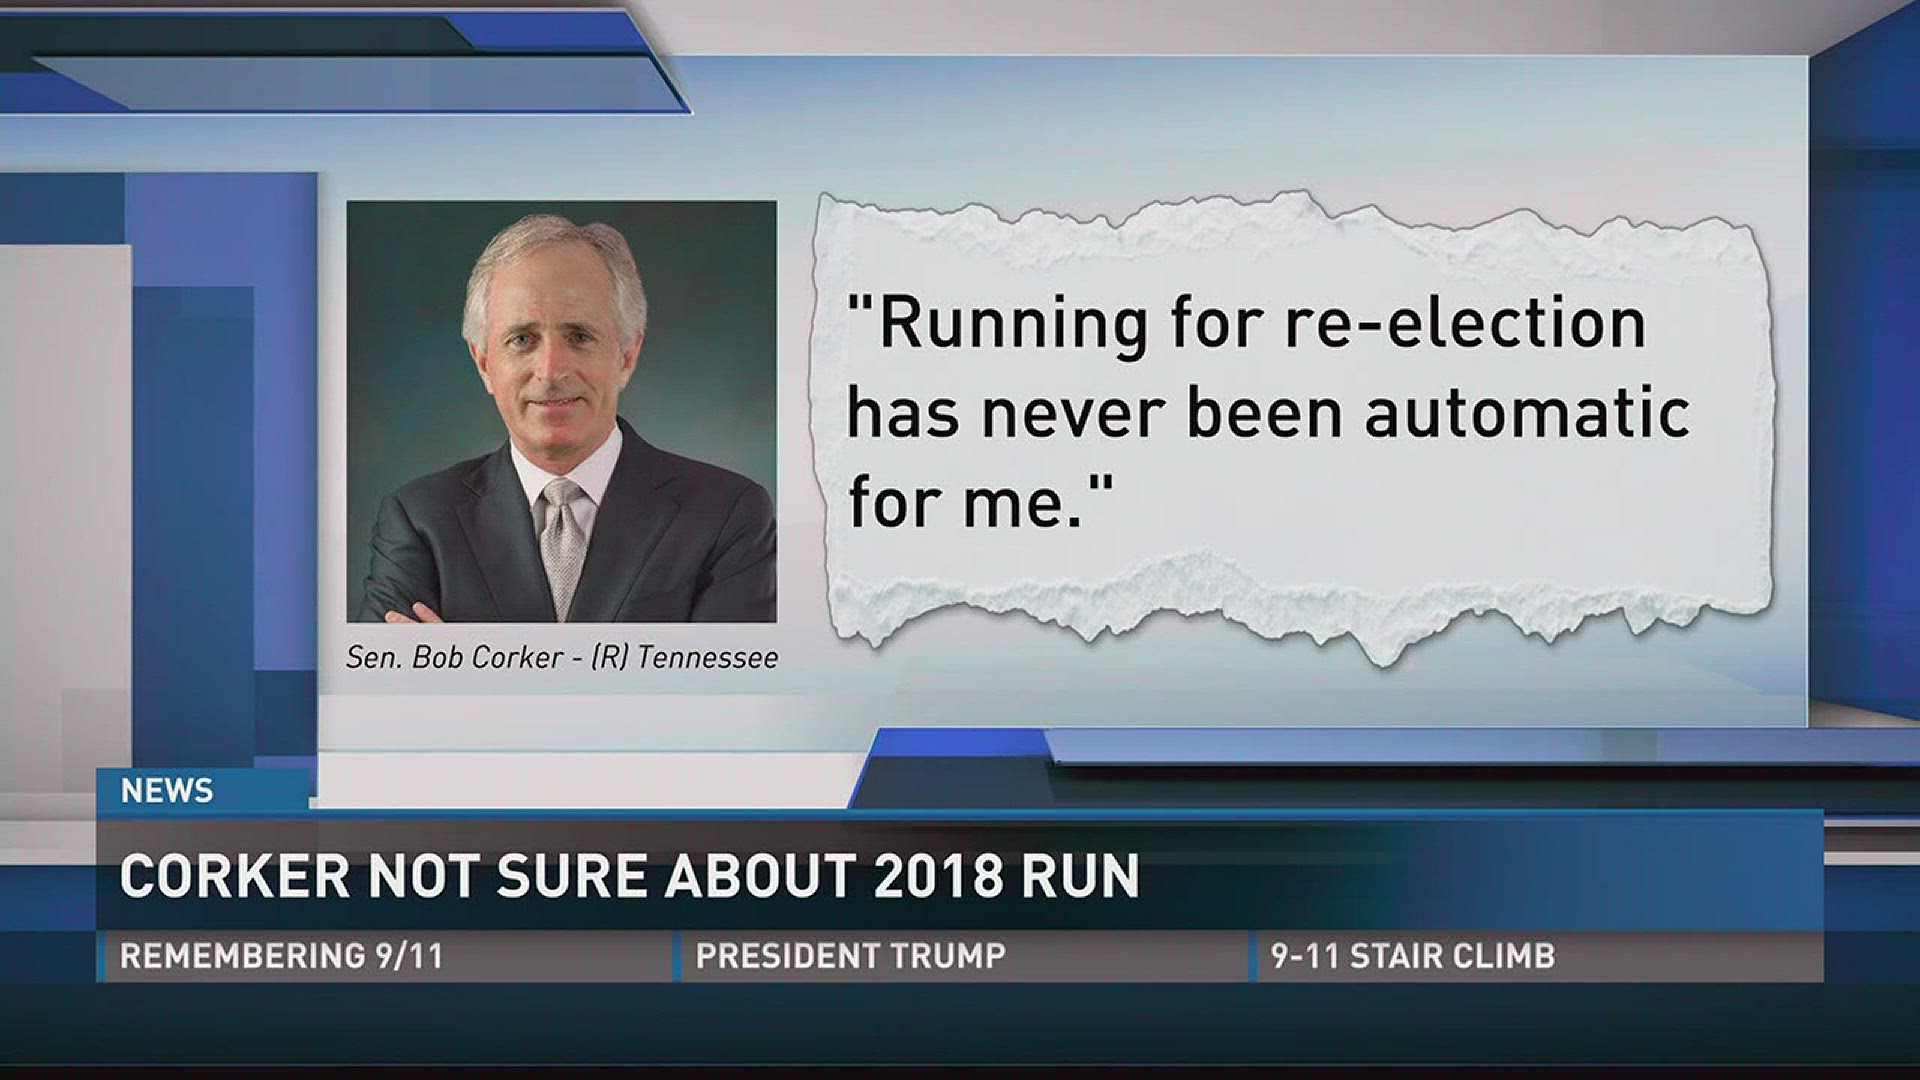 The Tennessee Republican, a sometimes critic of President Donald Trump, said in a statement Monday that "running for re-election has never been automatic for me."